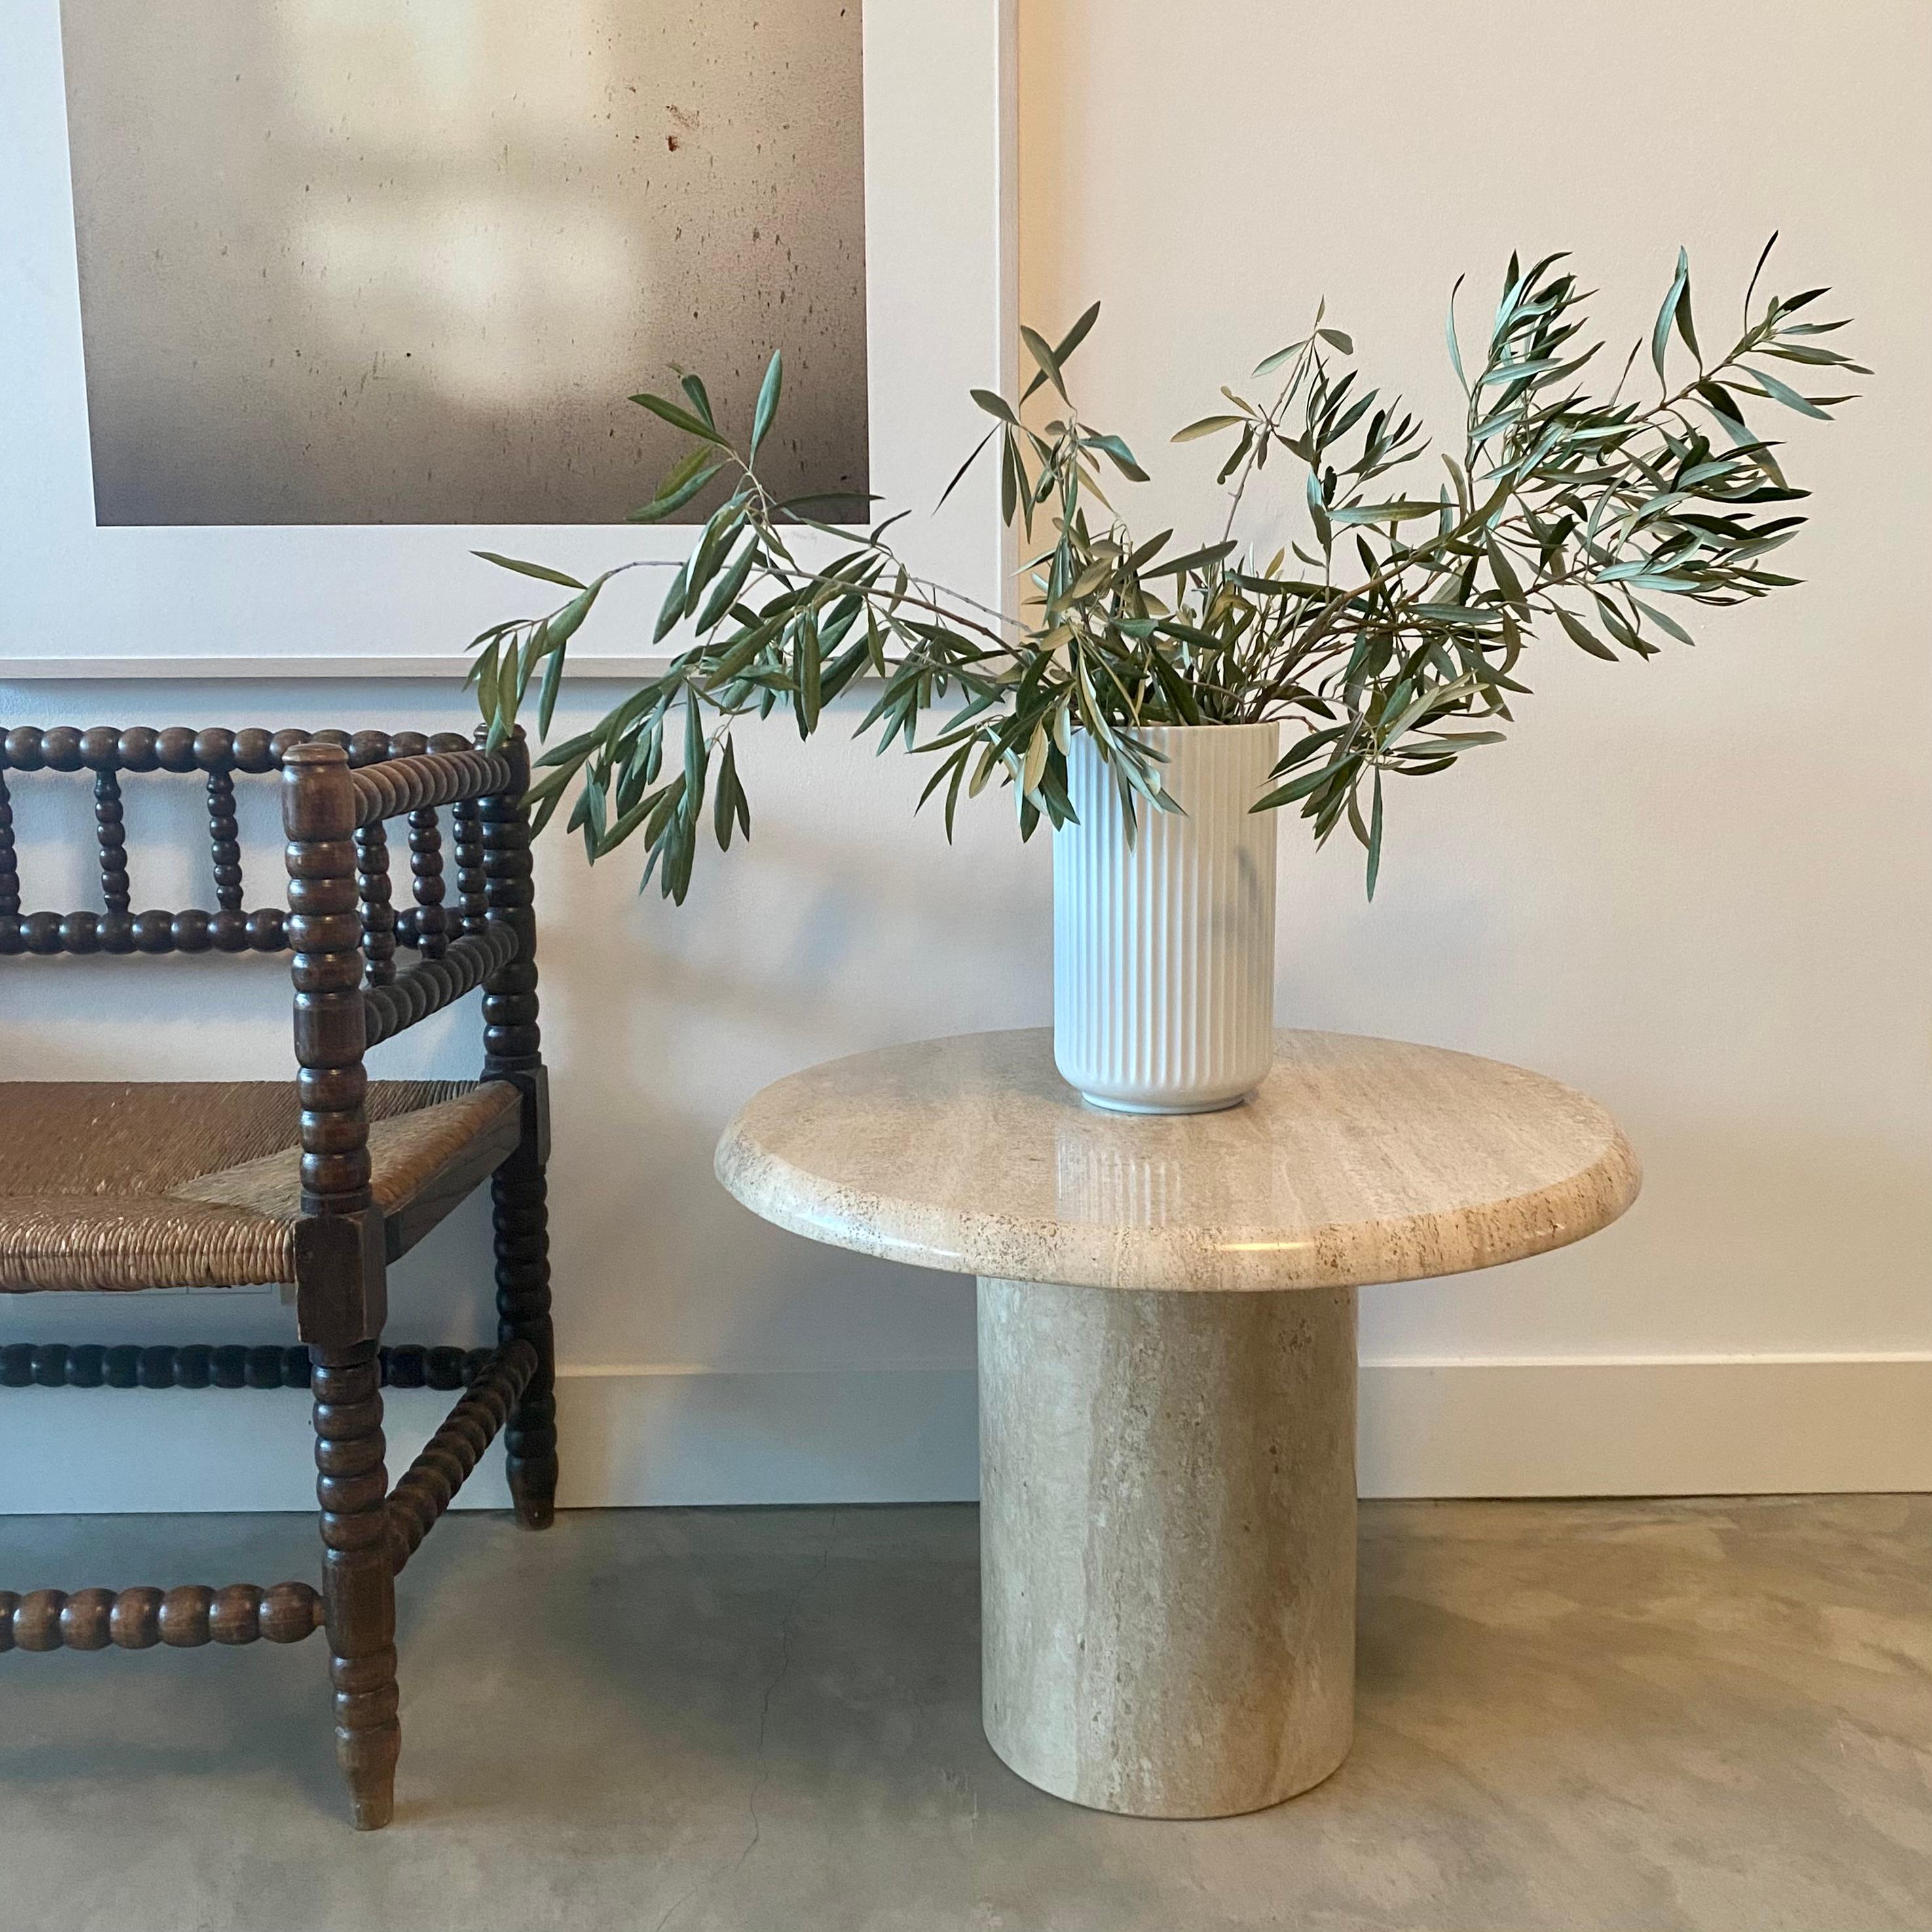 Introducing the perfect addition to your home decor, a solid round Roman Travertine coffee table. This beautiful piece of Italian design from 1970 is sure to make a statement in any room.

Crafted from stunning Roman Travertine, this coffee table